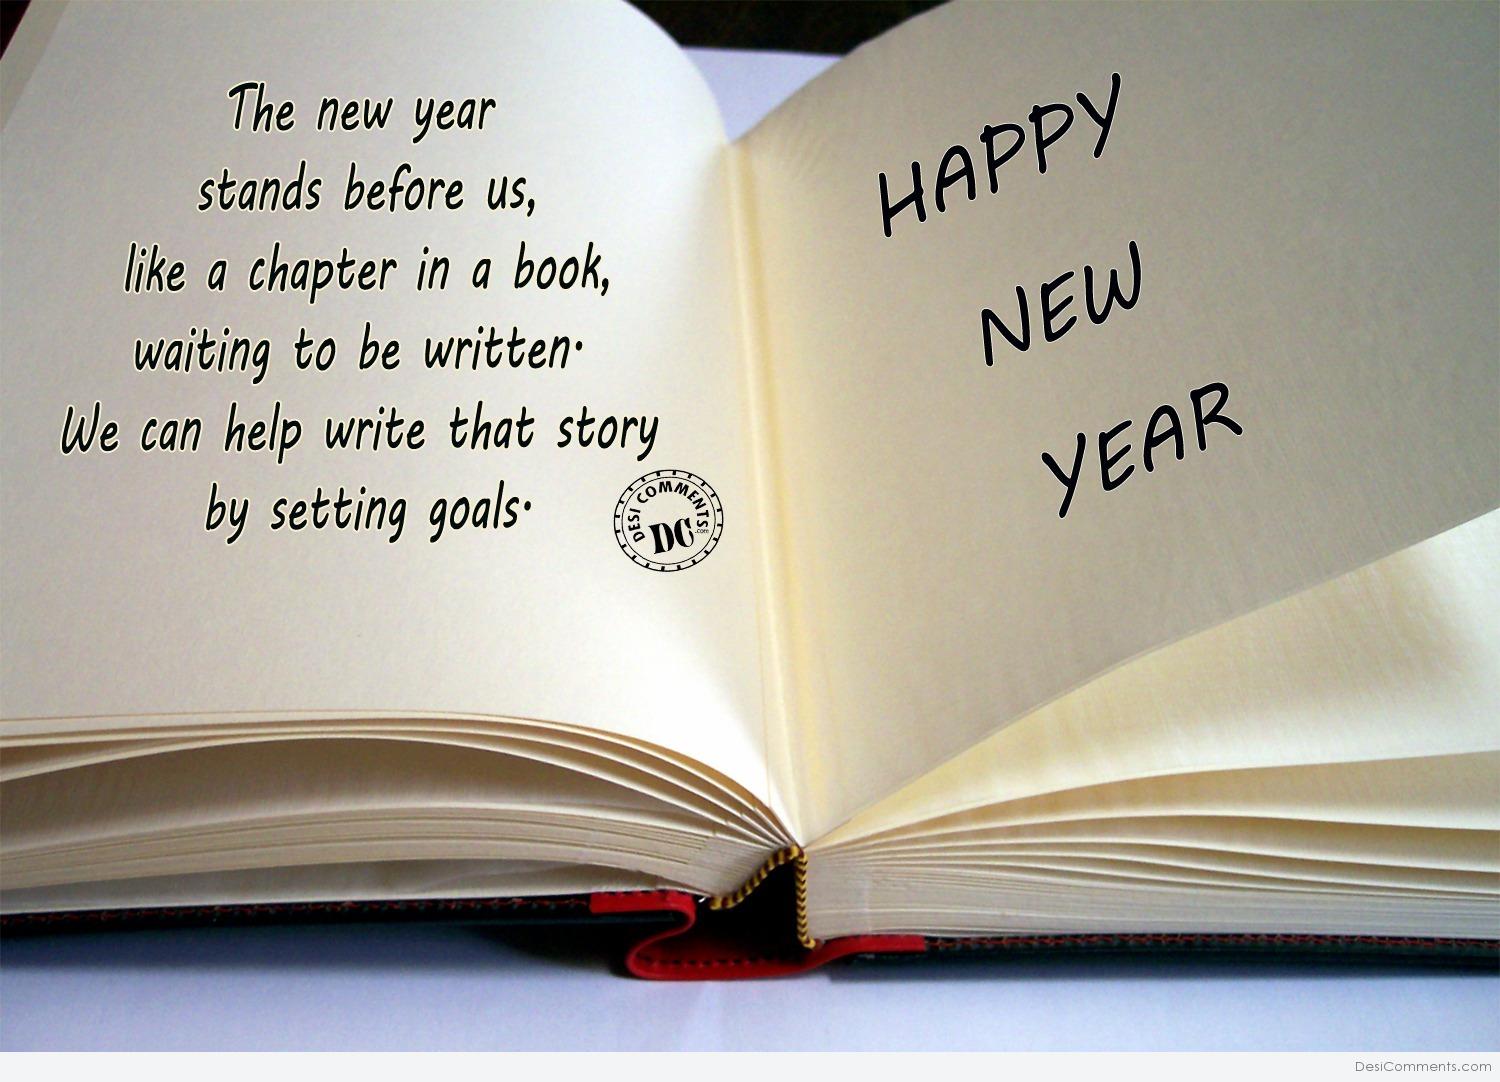 They this book this year. Quotes about New year. Book Happy New year. Chapter in a book. New year booklet.